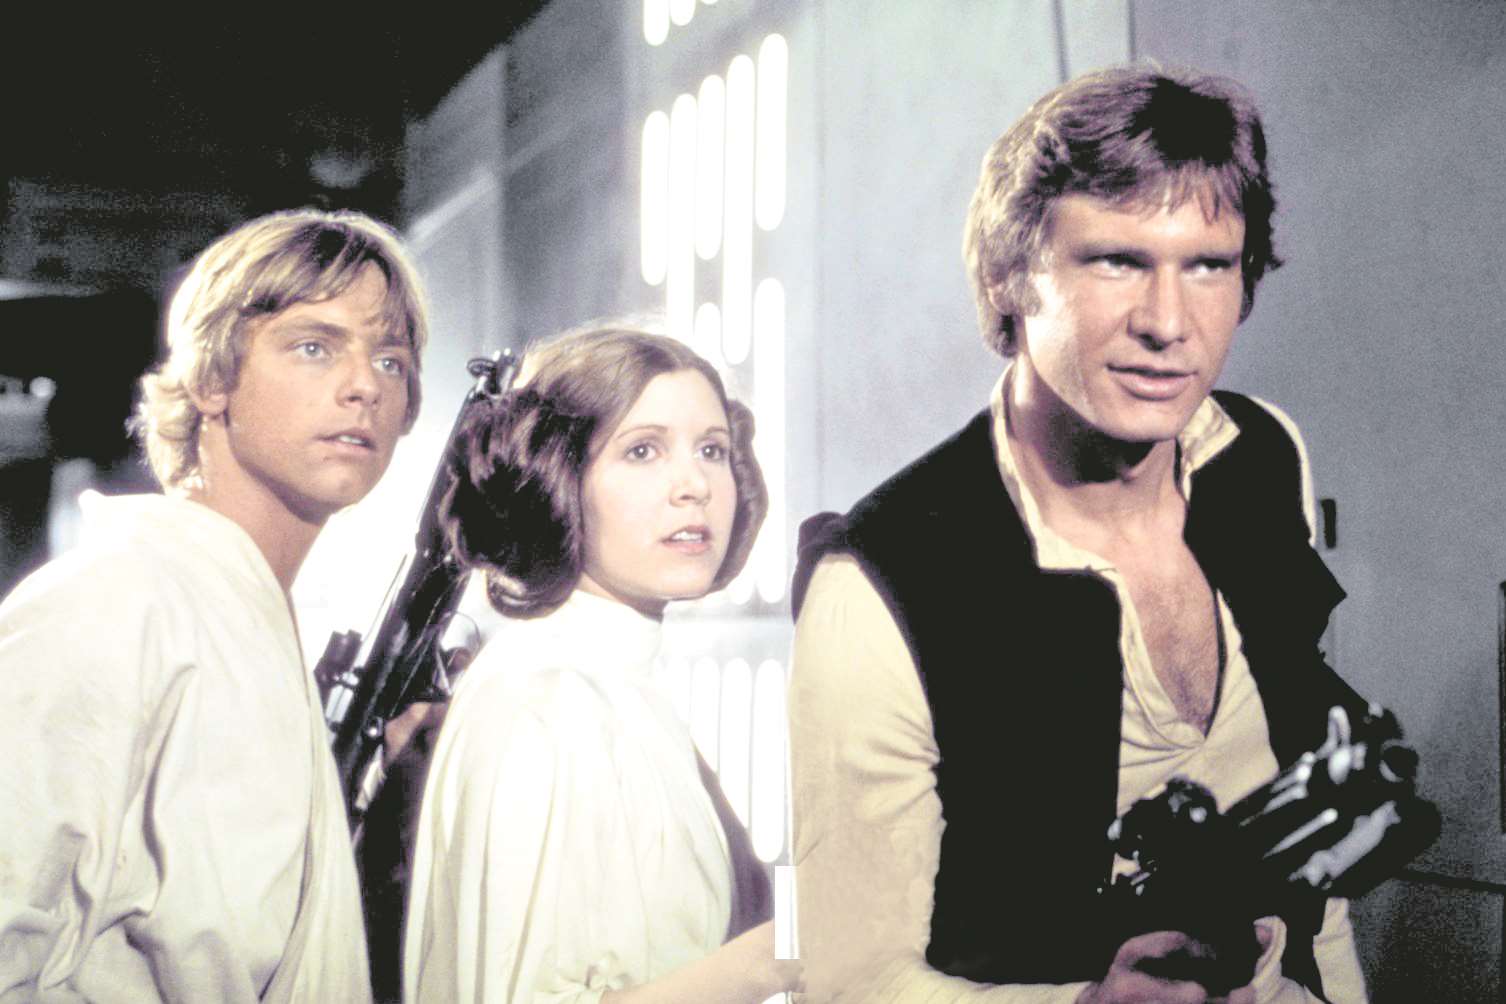 The first Star Wars film, A New Hope, was released in 1977